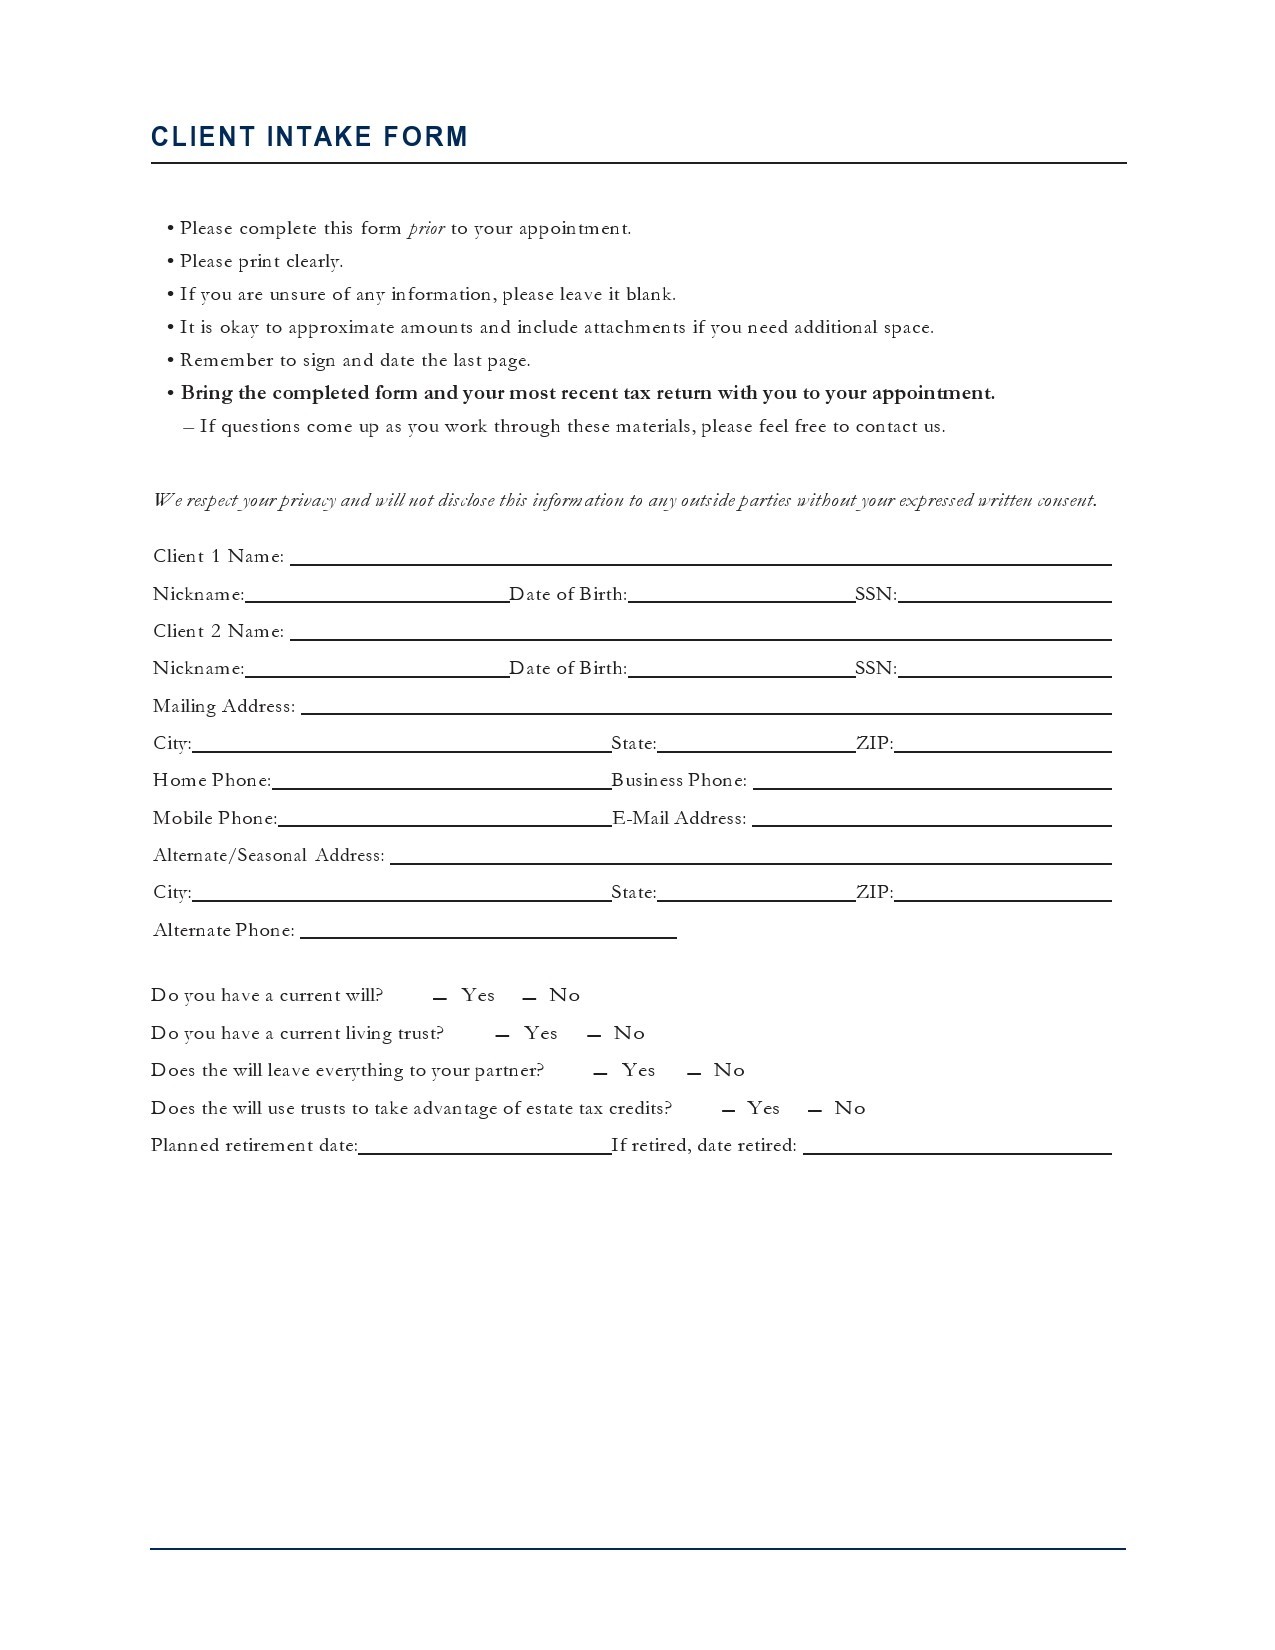 Free client intake form 11